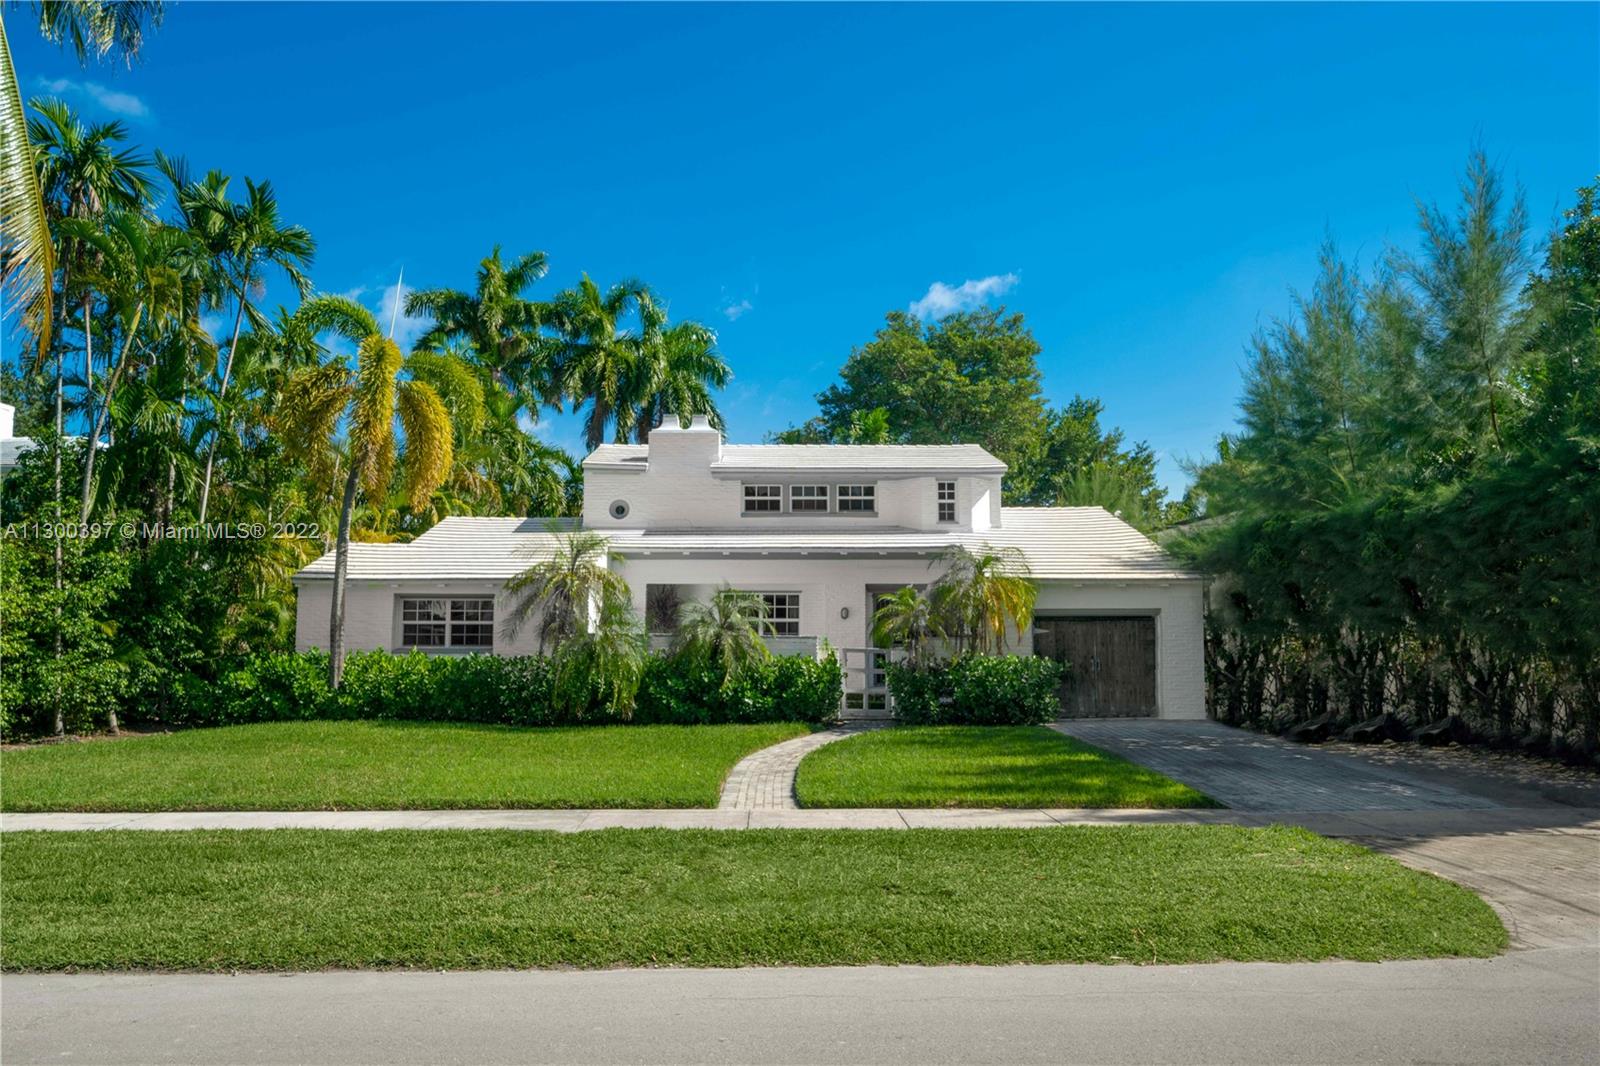 Enjoy living in this private oasis on the prestigious North Bay Road. Located on a 8,556 Sf lot, this 5 Bed/2.5 Bath home boasts 1930’s architectural details, custom built ins, beautifully integrated nautical elements & fireplace. Natural light pours in through flowthrough windows illuminating the open living area. Relax out on your large balcony off the primary bedroom and take in views of your oversized backyard and detached cabana.